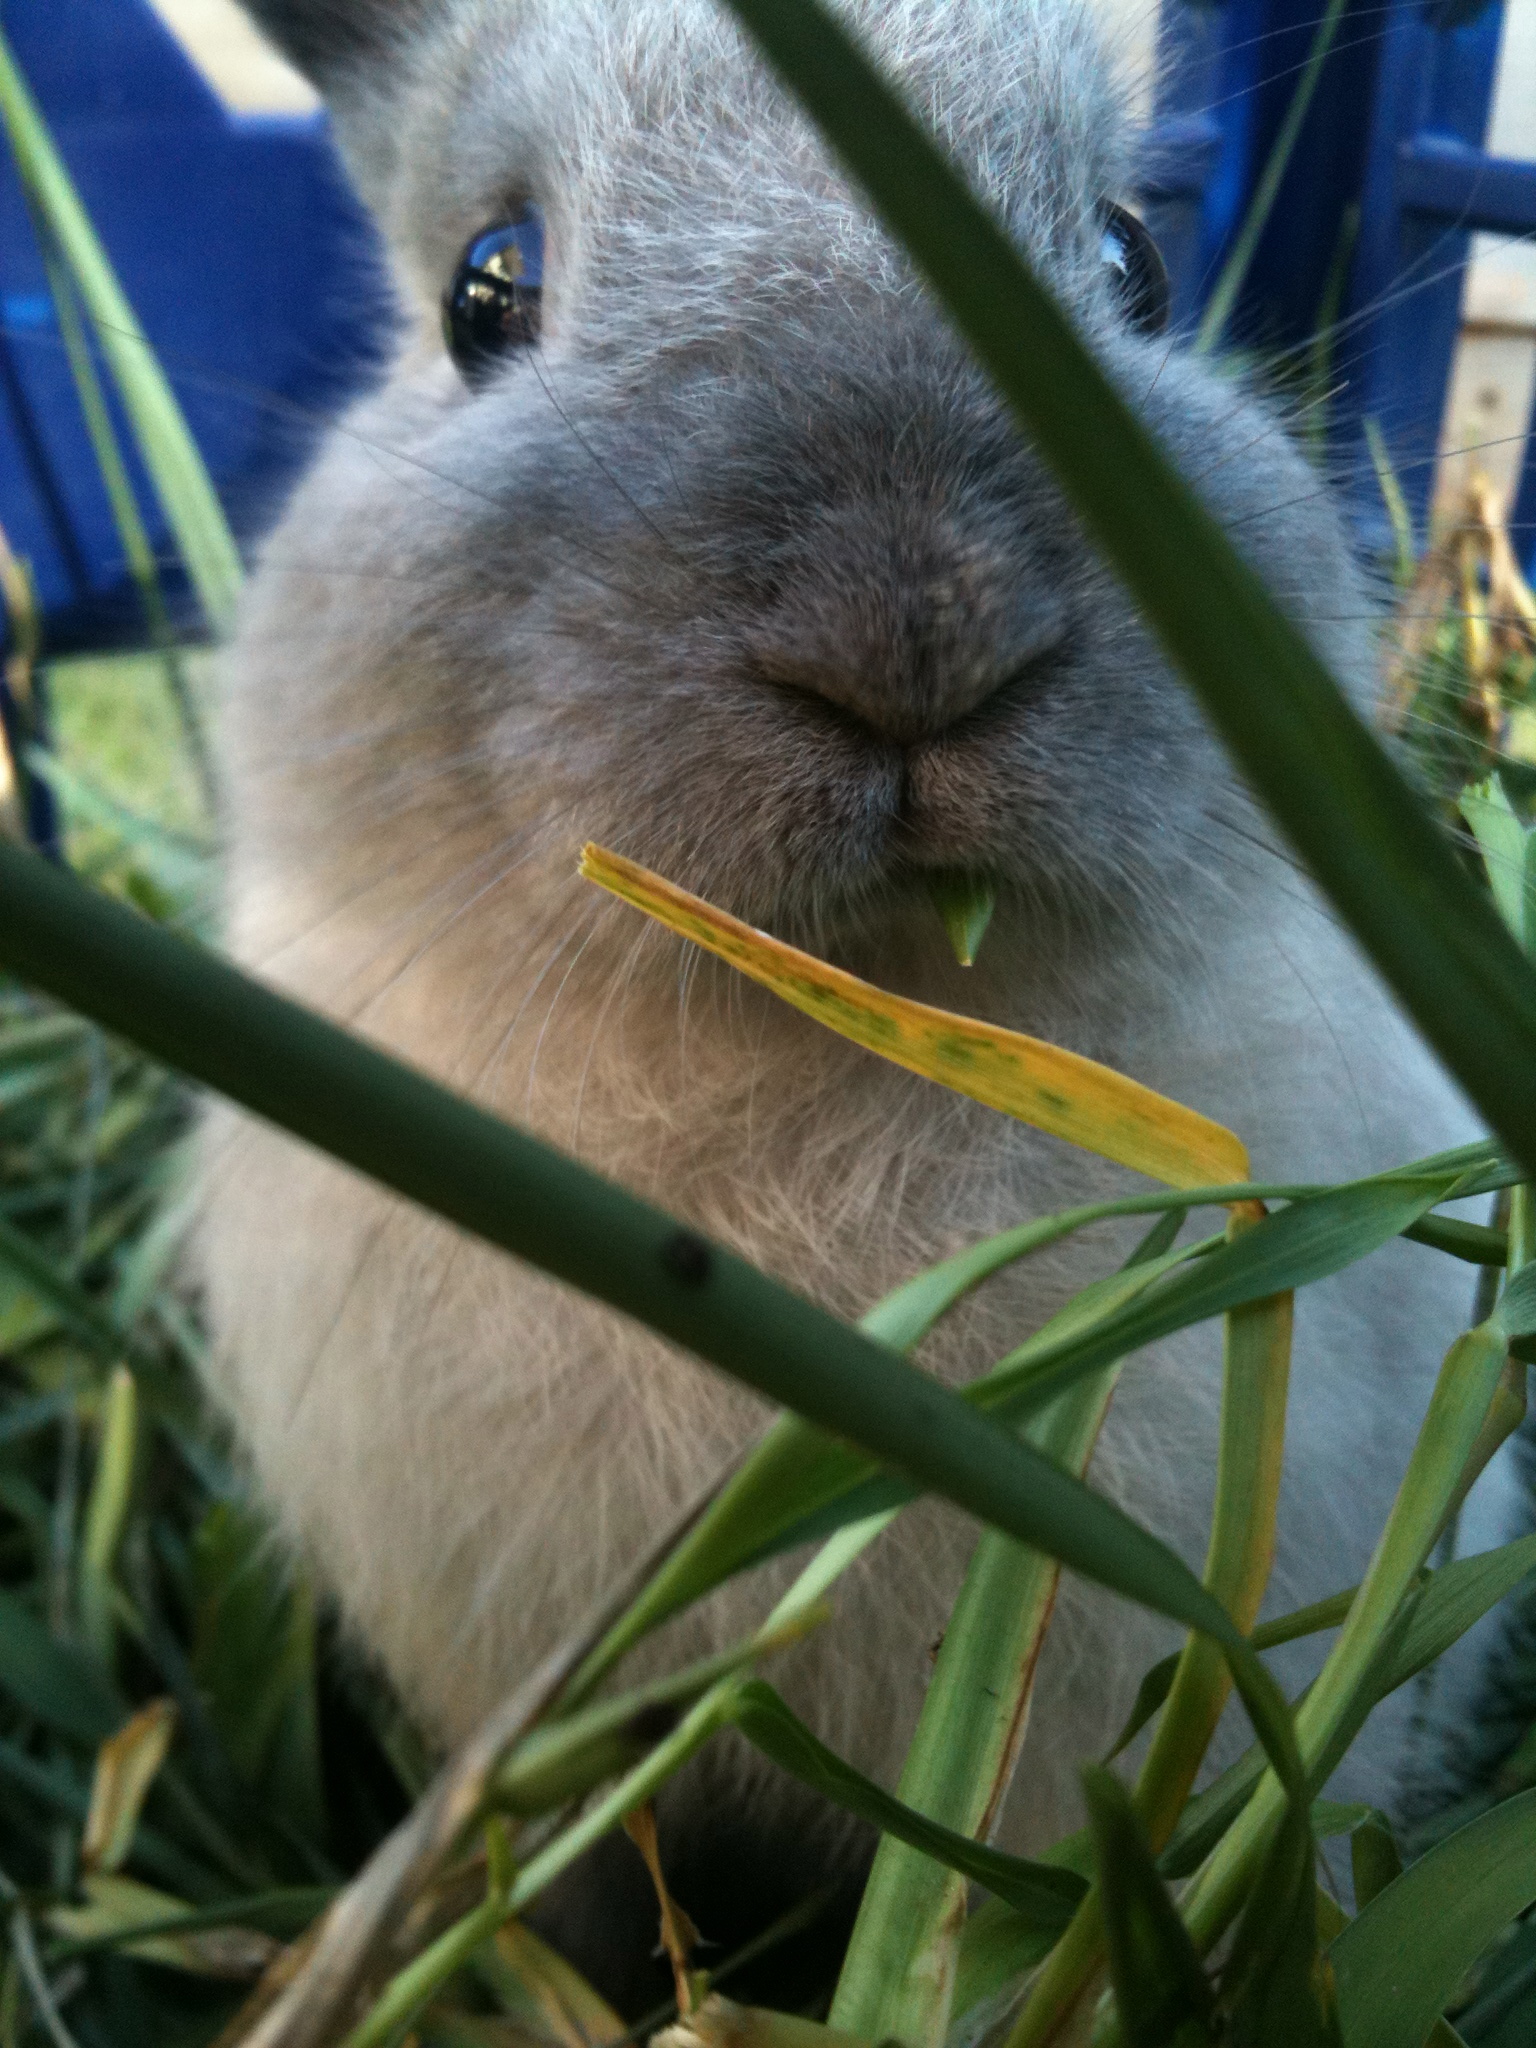 Bunny, You Have a Blade of Grass in Your Teeth